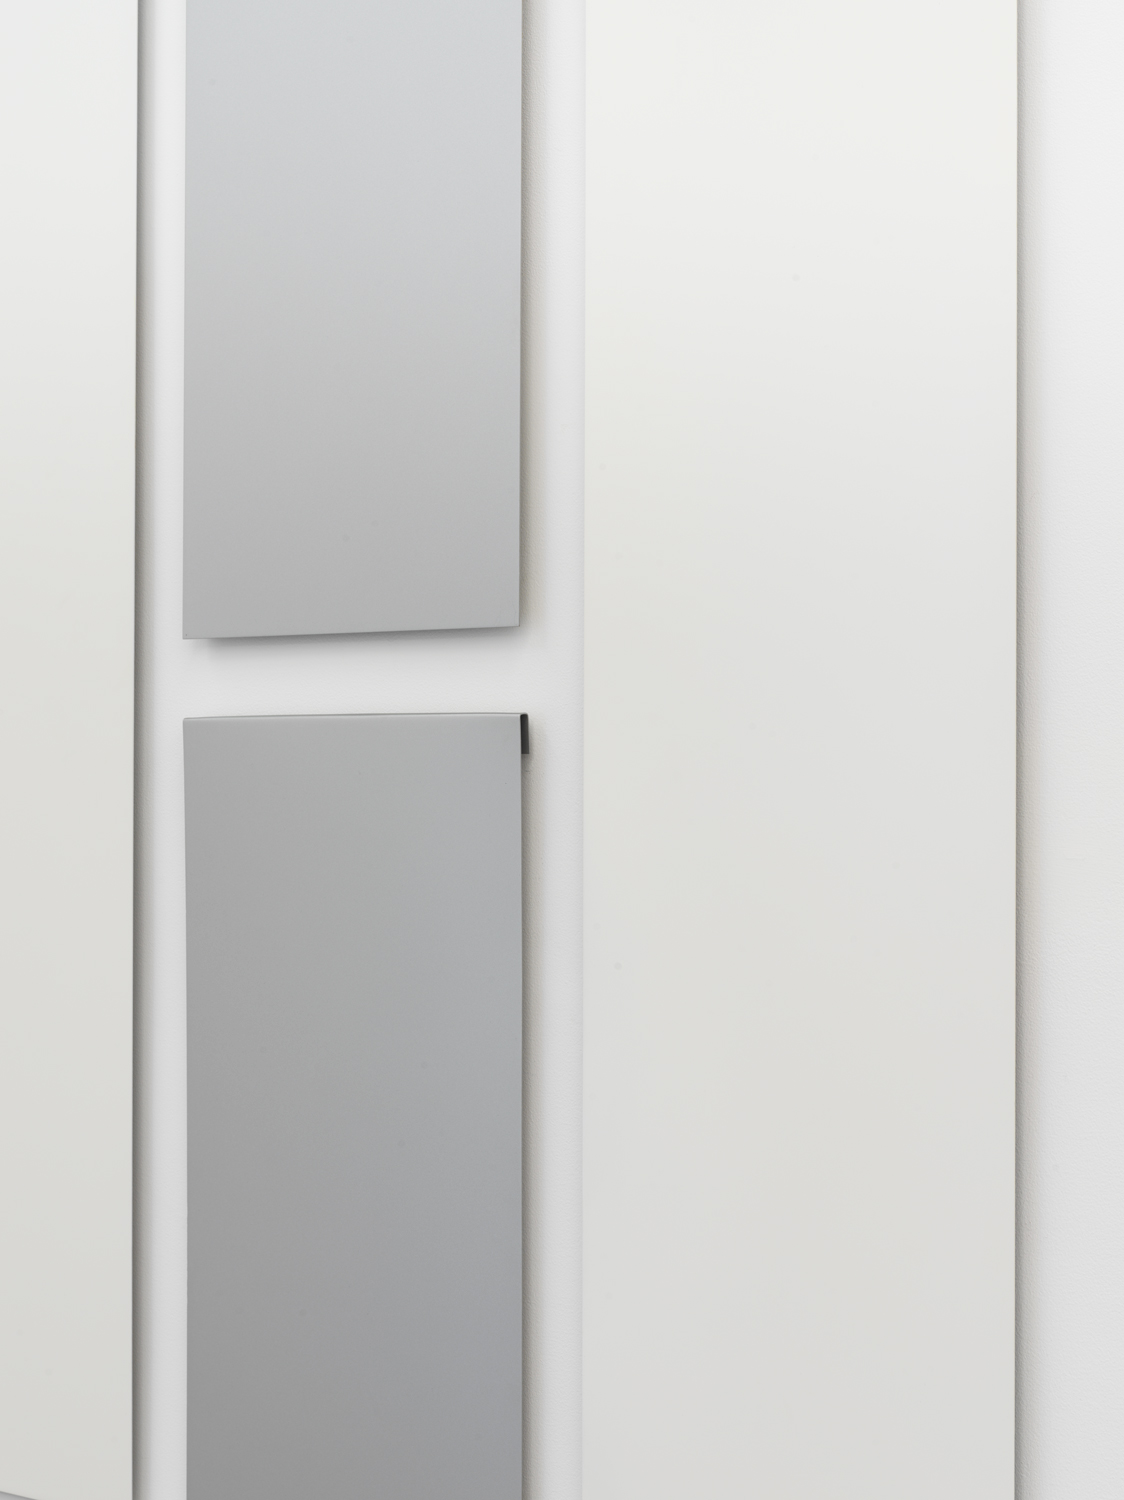 Don Dudley, Untitled (Aluminum Module) detail, 1974-2019, acrylic lacquer on aluminum, each module 46.75 x 12 in; overall 95.5 x 40 in.